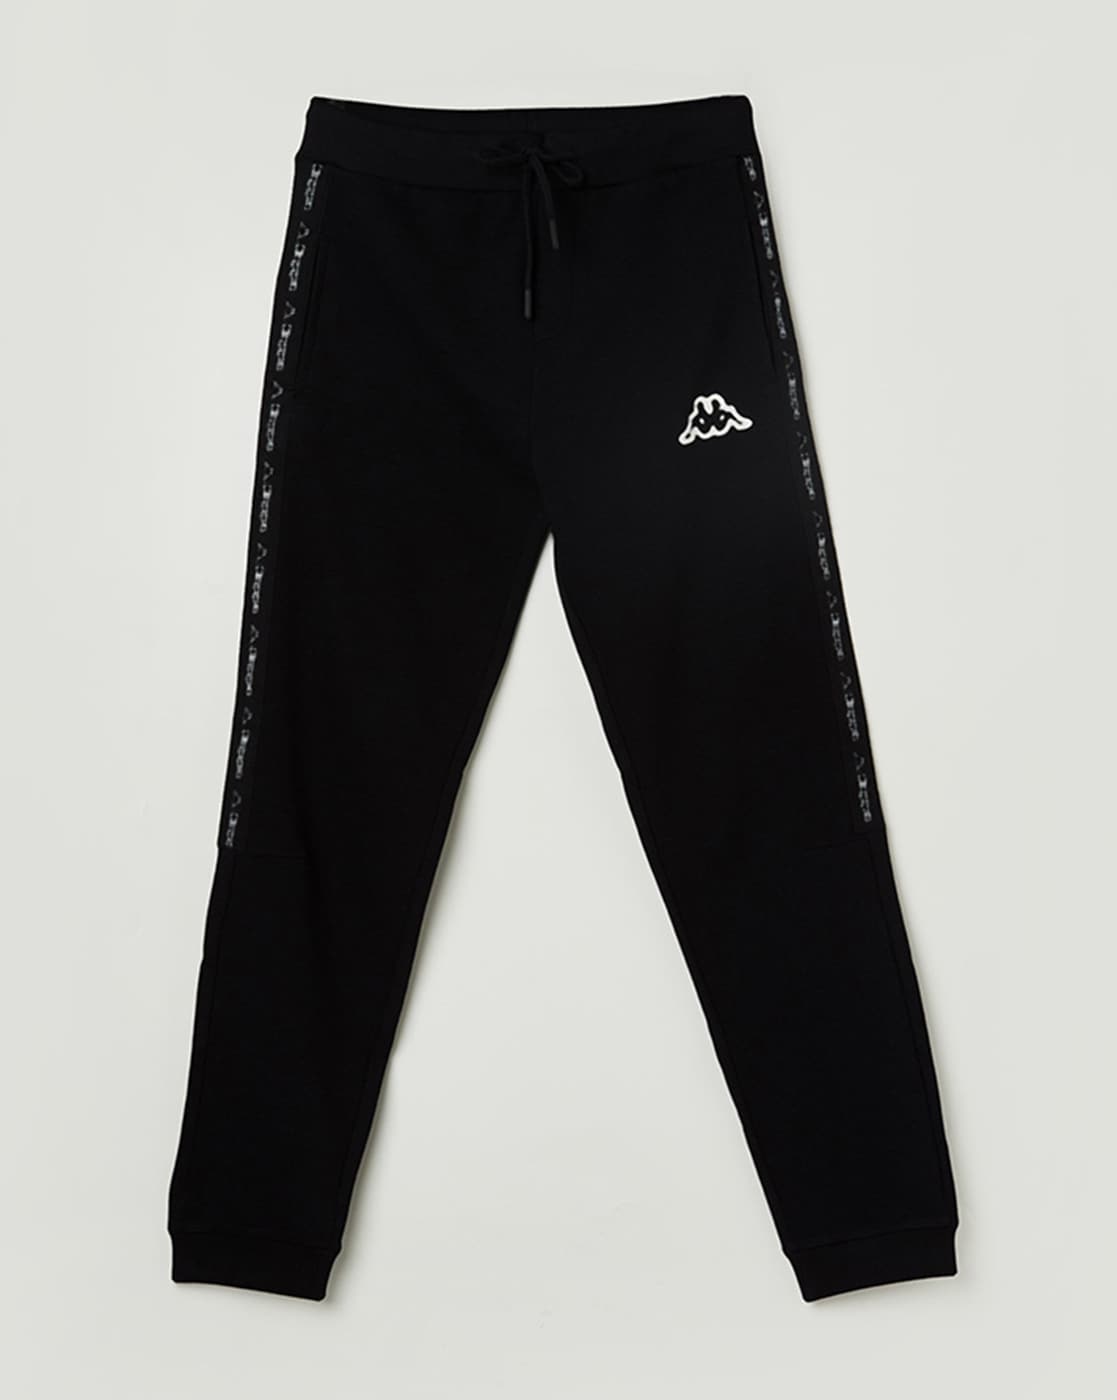 ☆ kappa track pants ☆彡, Women's Fashion, Bottoms, Other Bottoms on Carousell